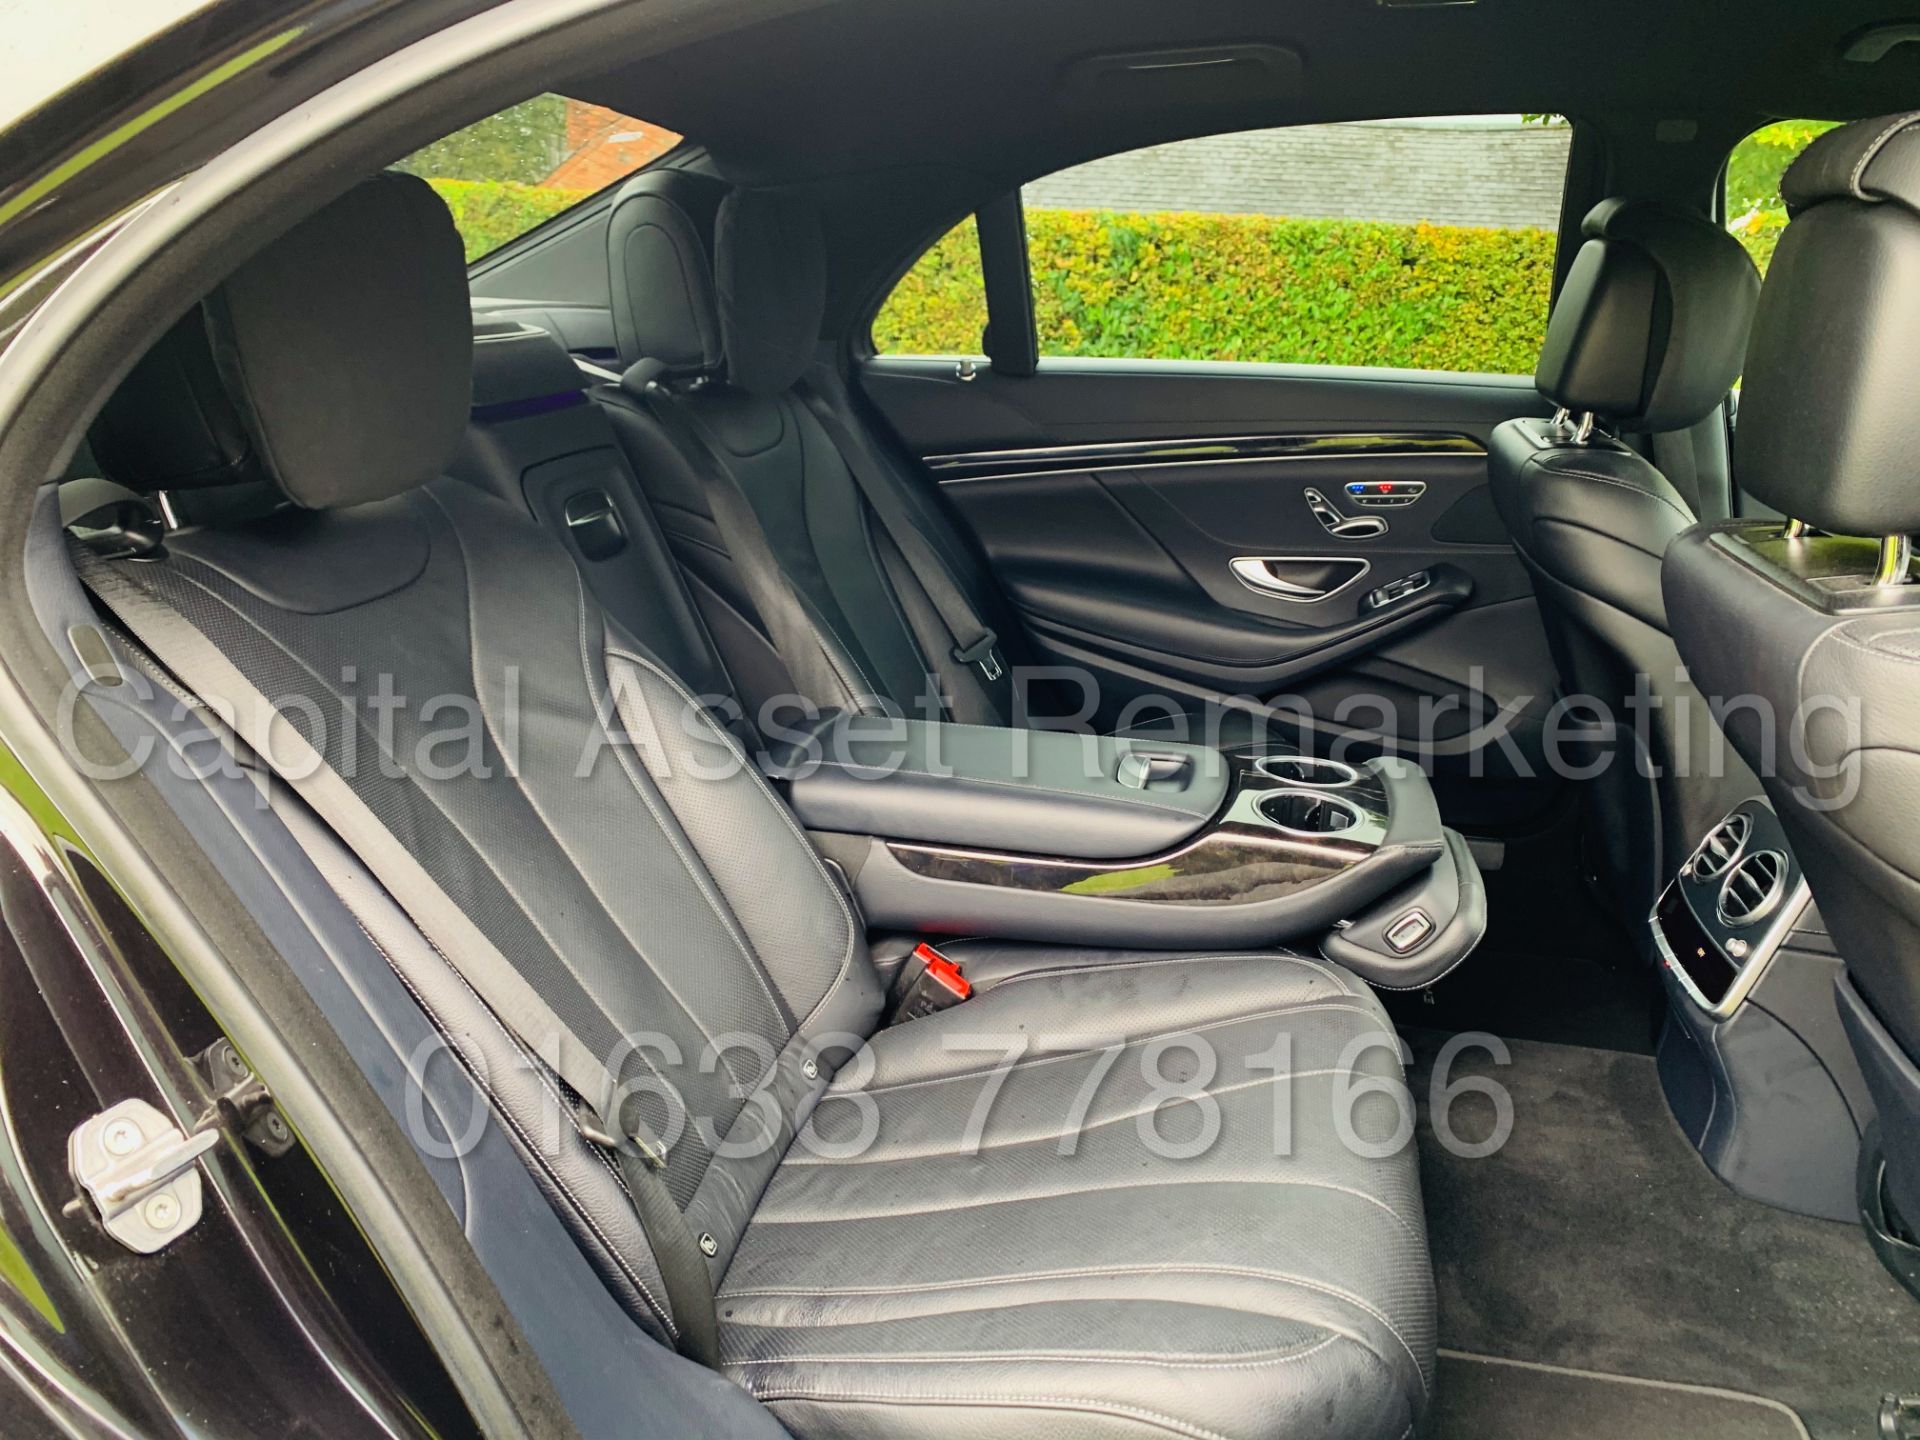 (ON SALE) MERCEDES-BENZ S350D *AMG LINE - SALOON* (2018) 9-G TRONIC - LEATHER - SAT NAV - Image 49 of 172